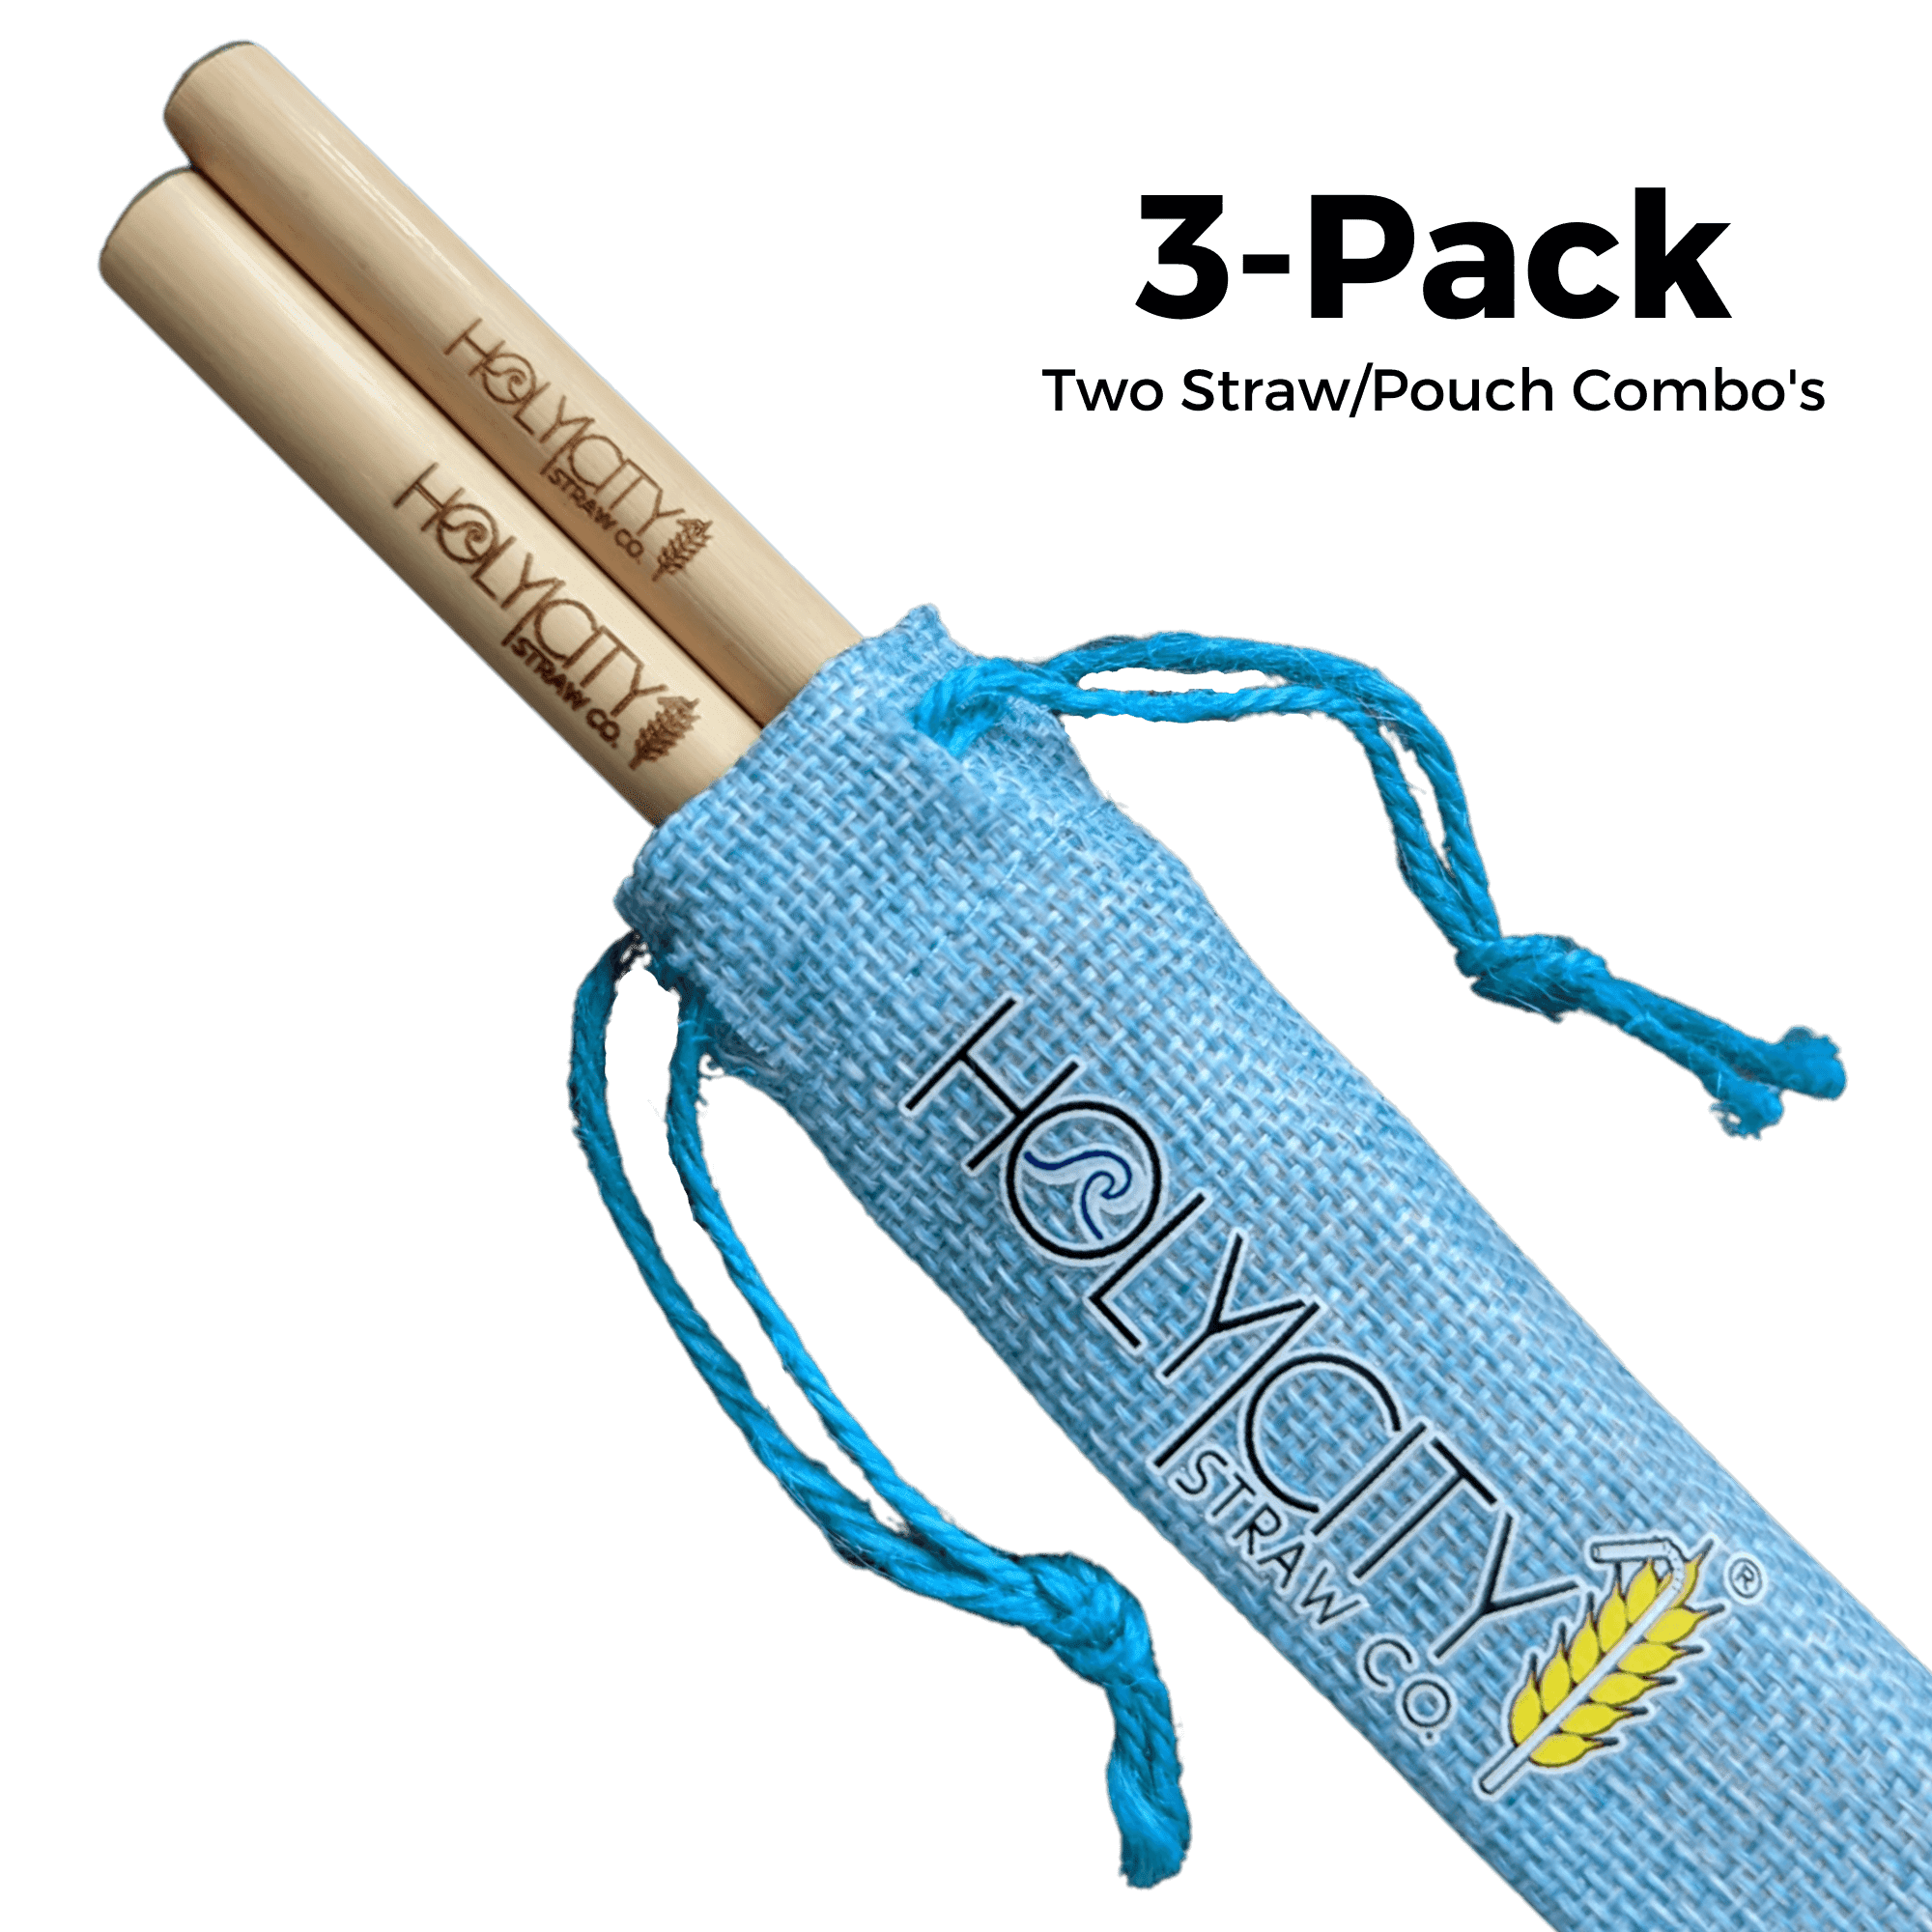 3 Pack Bundle of Two Straw Holy City Straw Company Branded Pouch